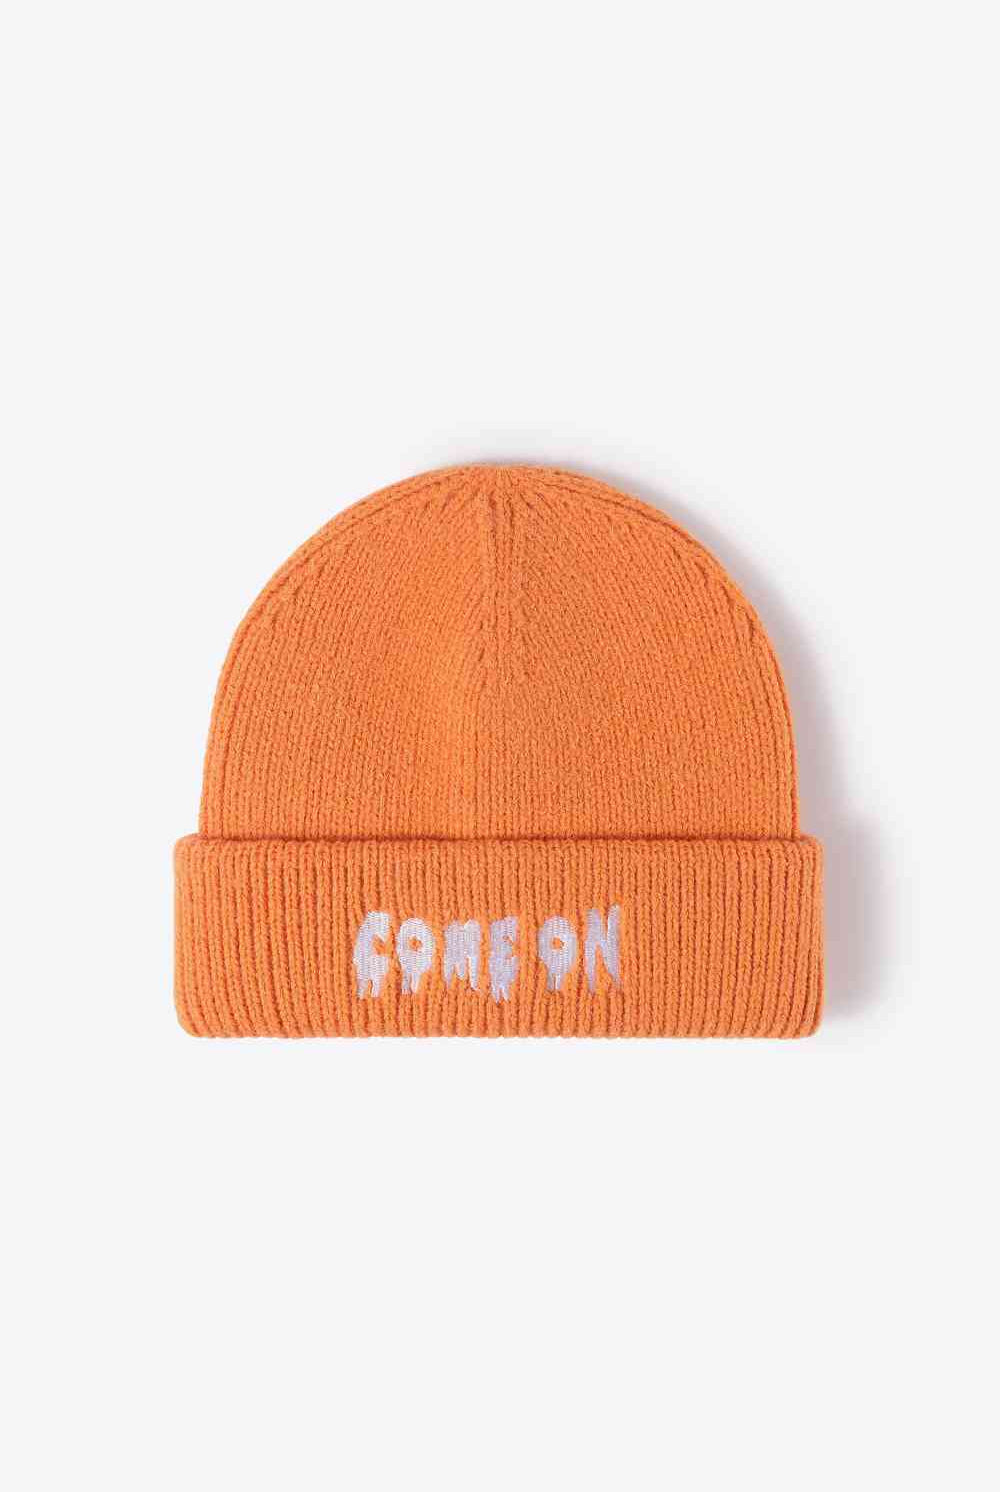 Coral COME ON Embroidered Cuff Knit Beanie Winter Accessories